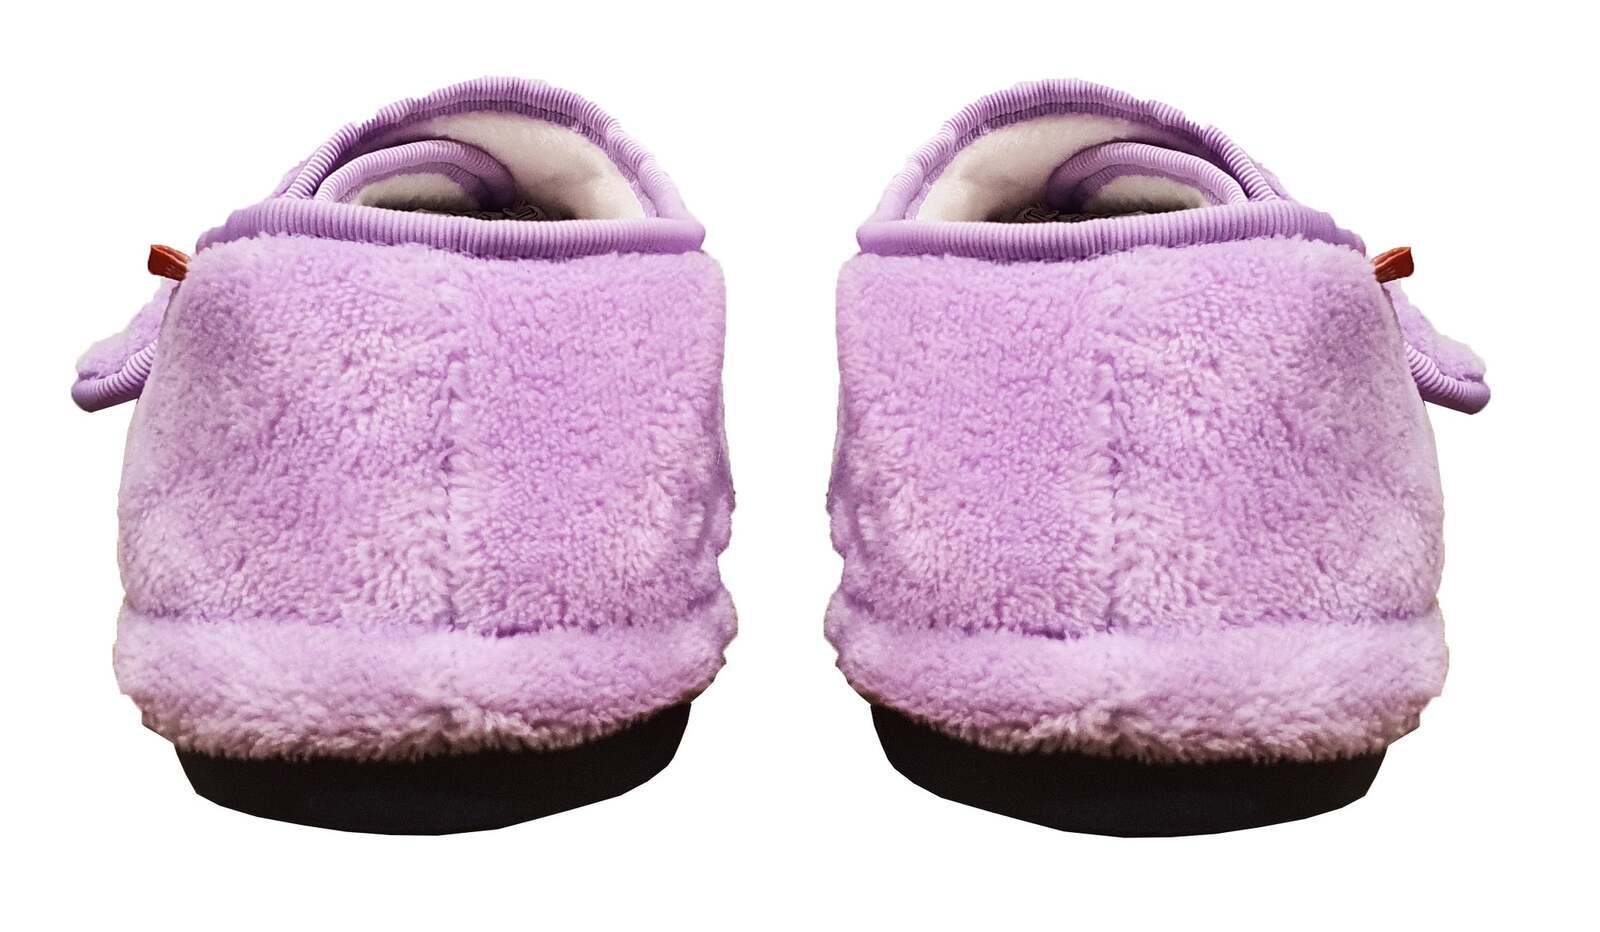 ARCHLINE Orthotic Plus Slippers Closed Scuffs Pain Relief Moccasins - Lilac - EU 38